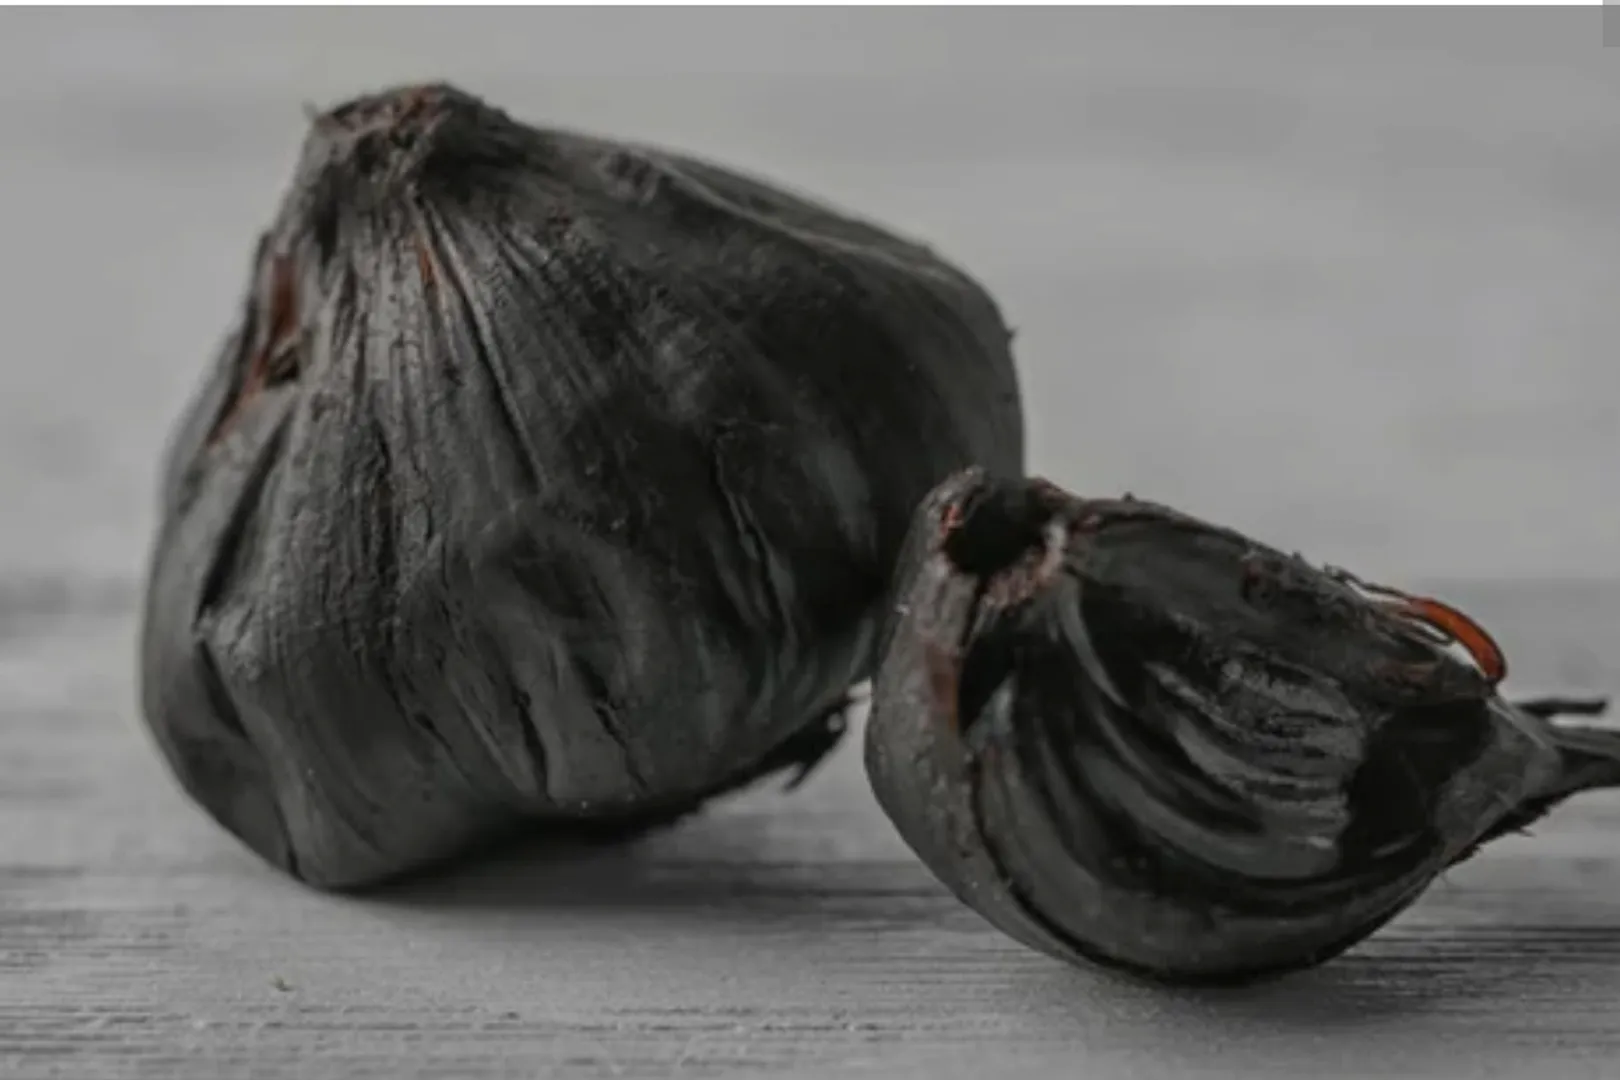 Black Garlic: With immune-boosting allicin and heart-protective properties, black garlic is a result of fermentation and offers unique health benefits.